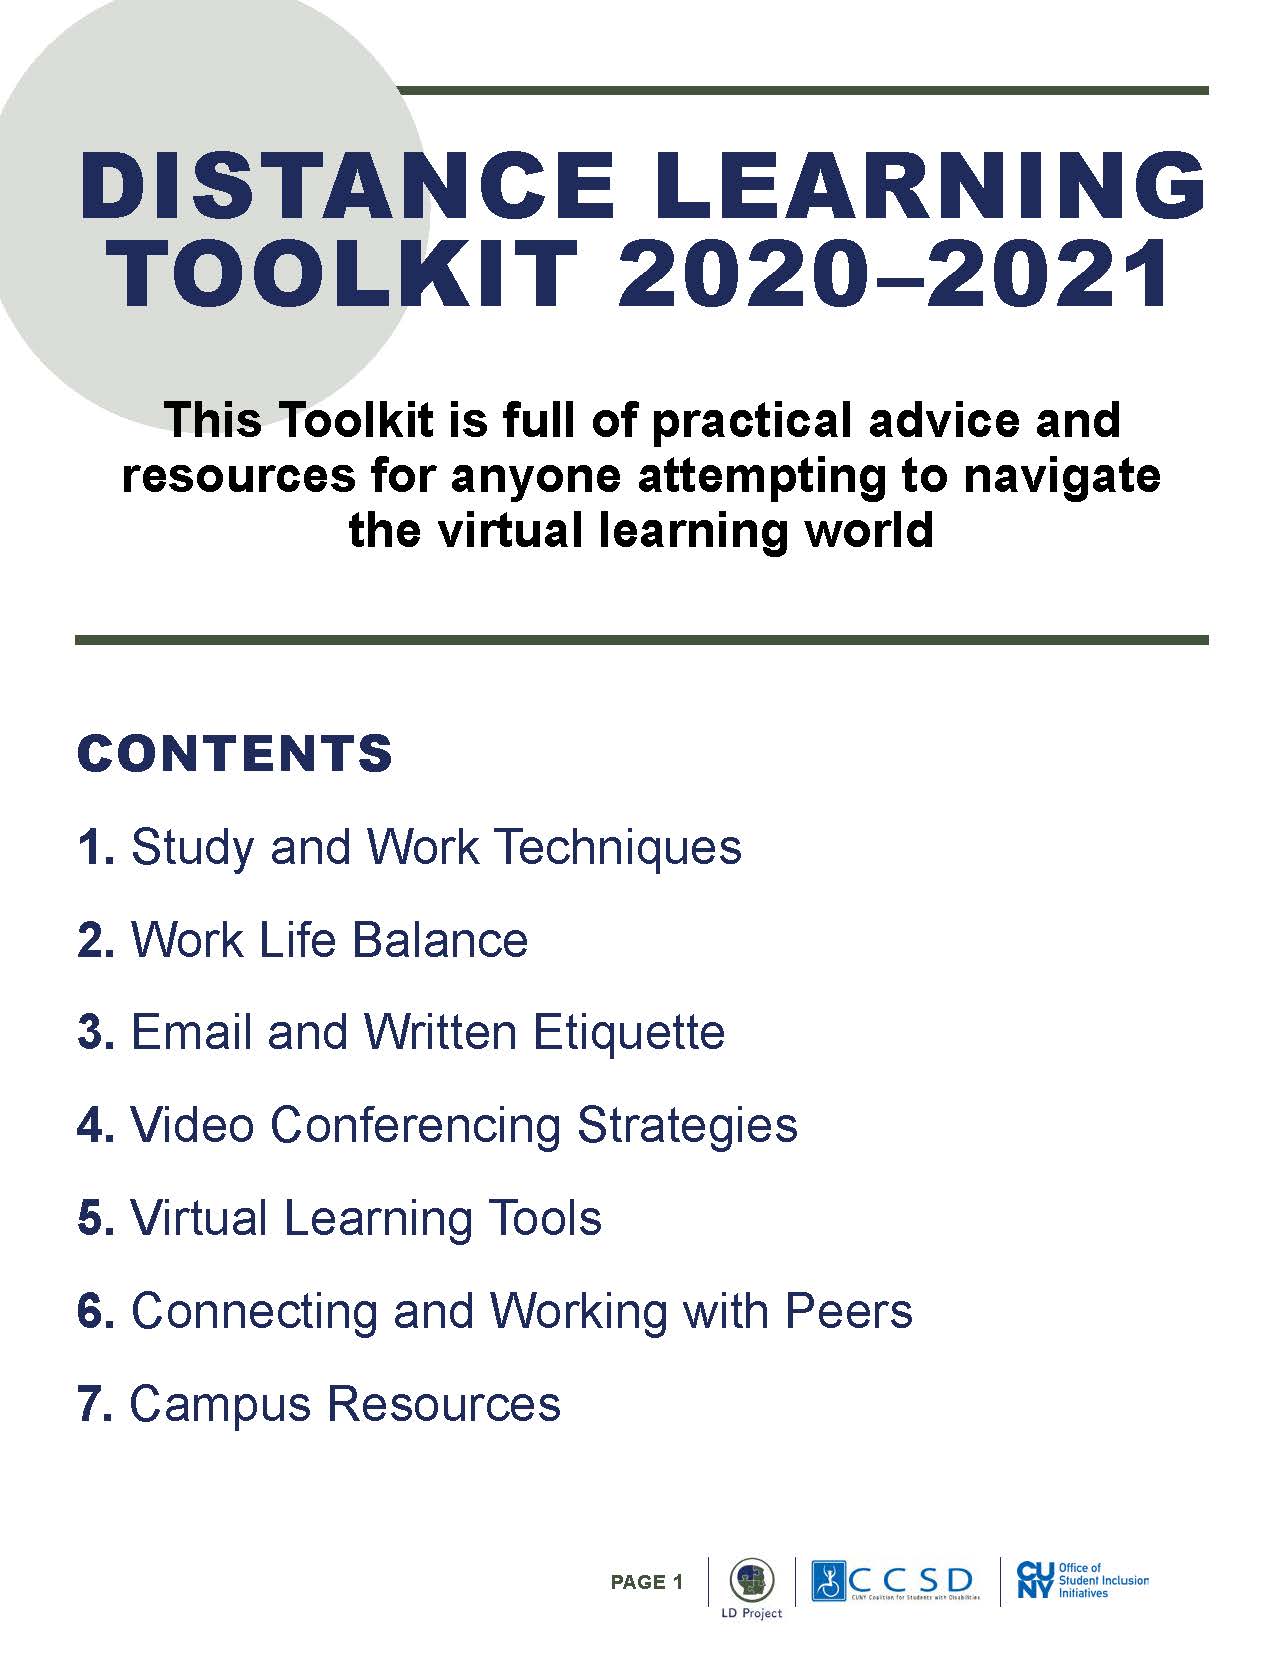 Distance Learning Toolkit cover